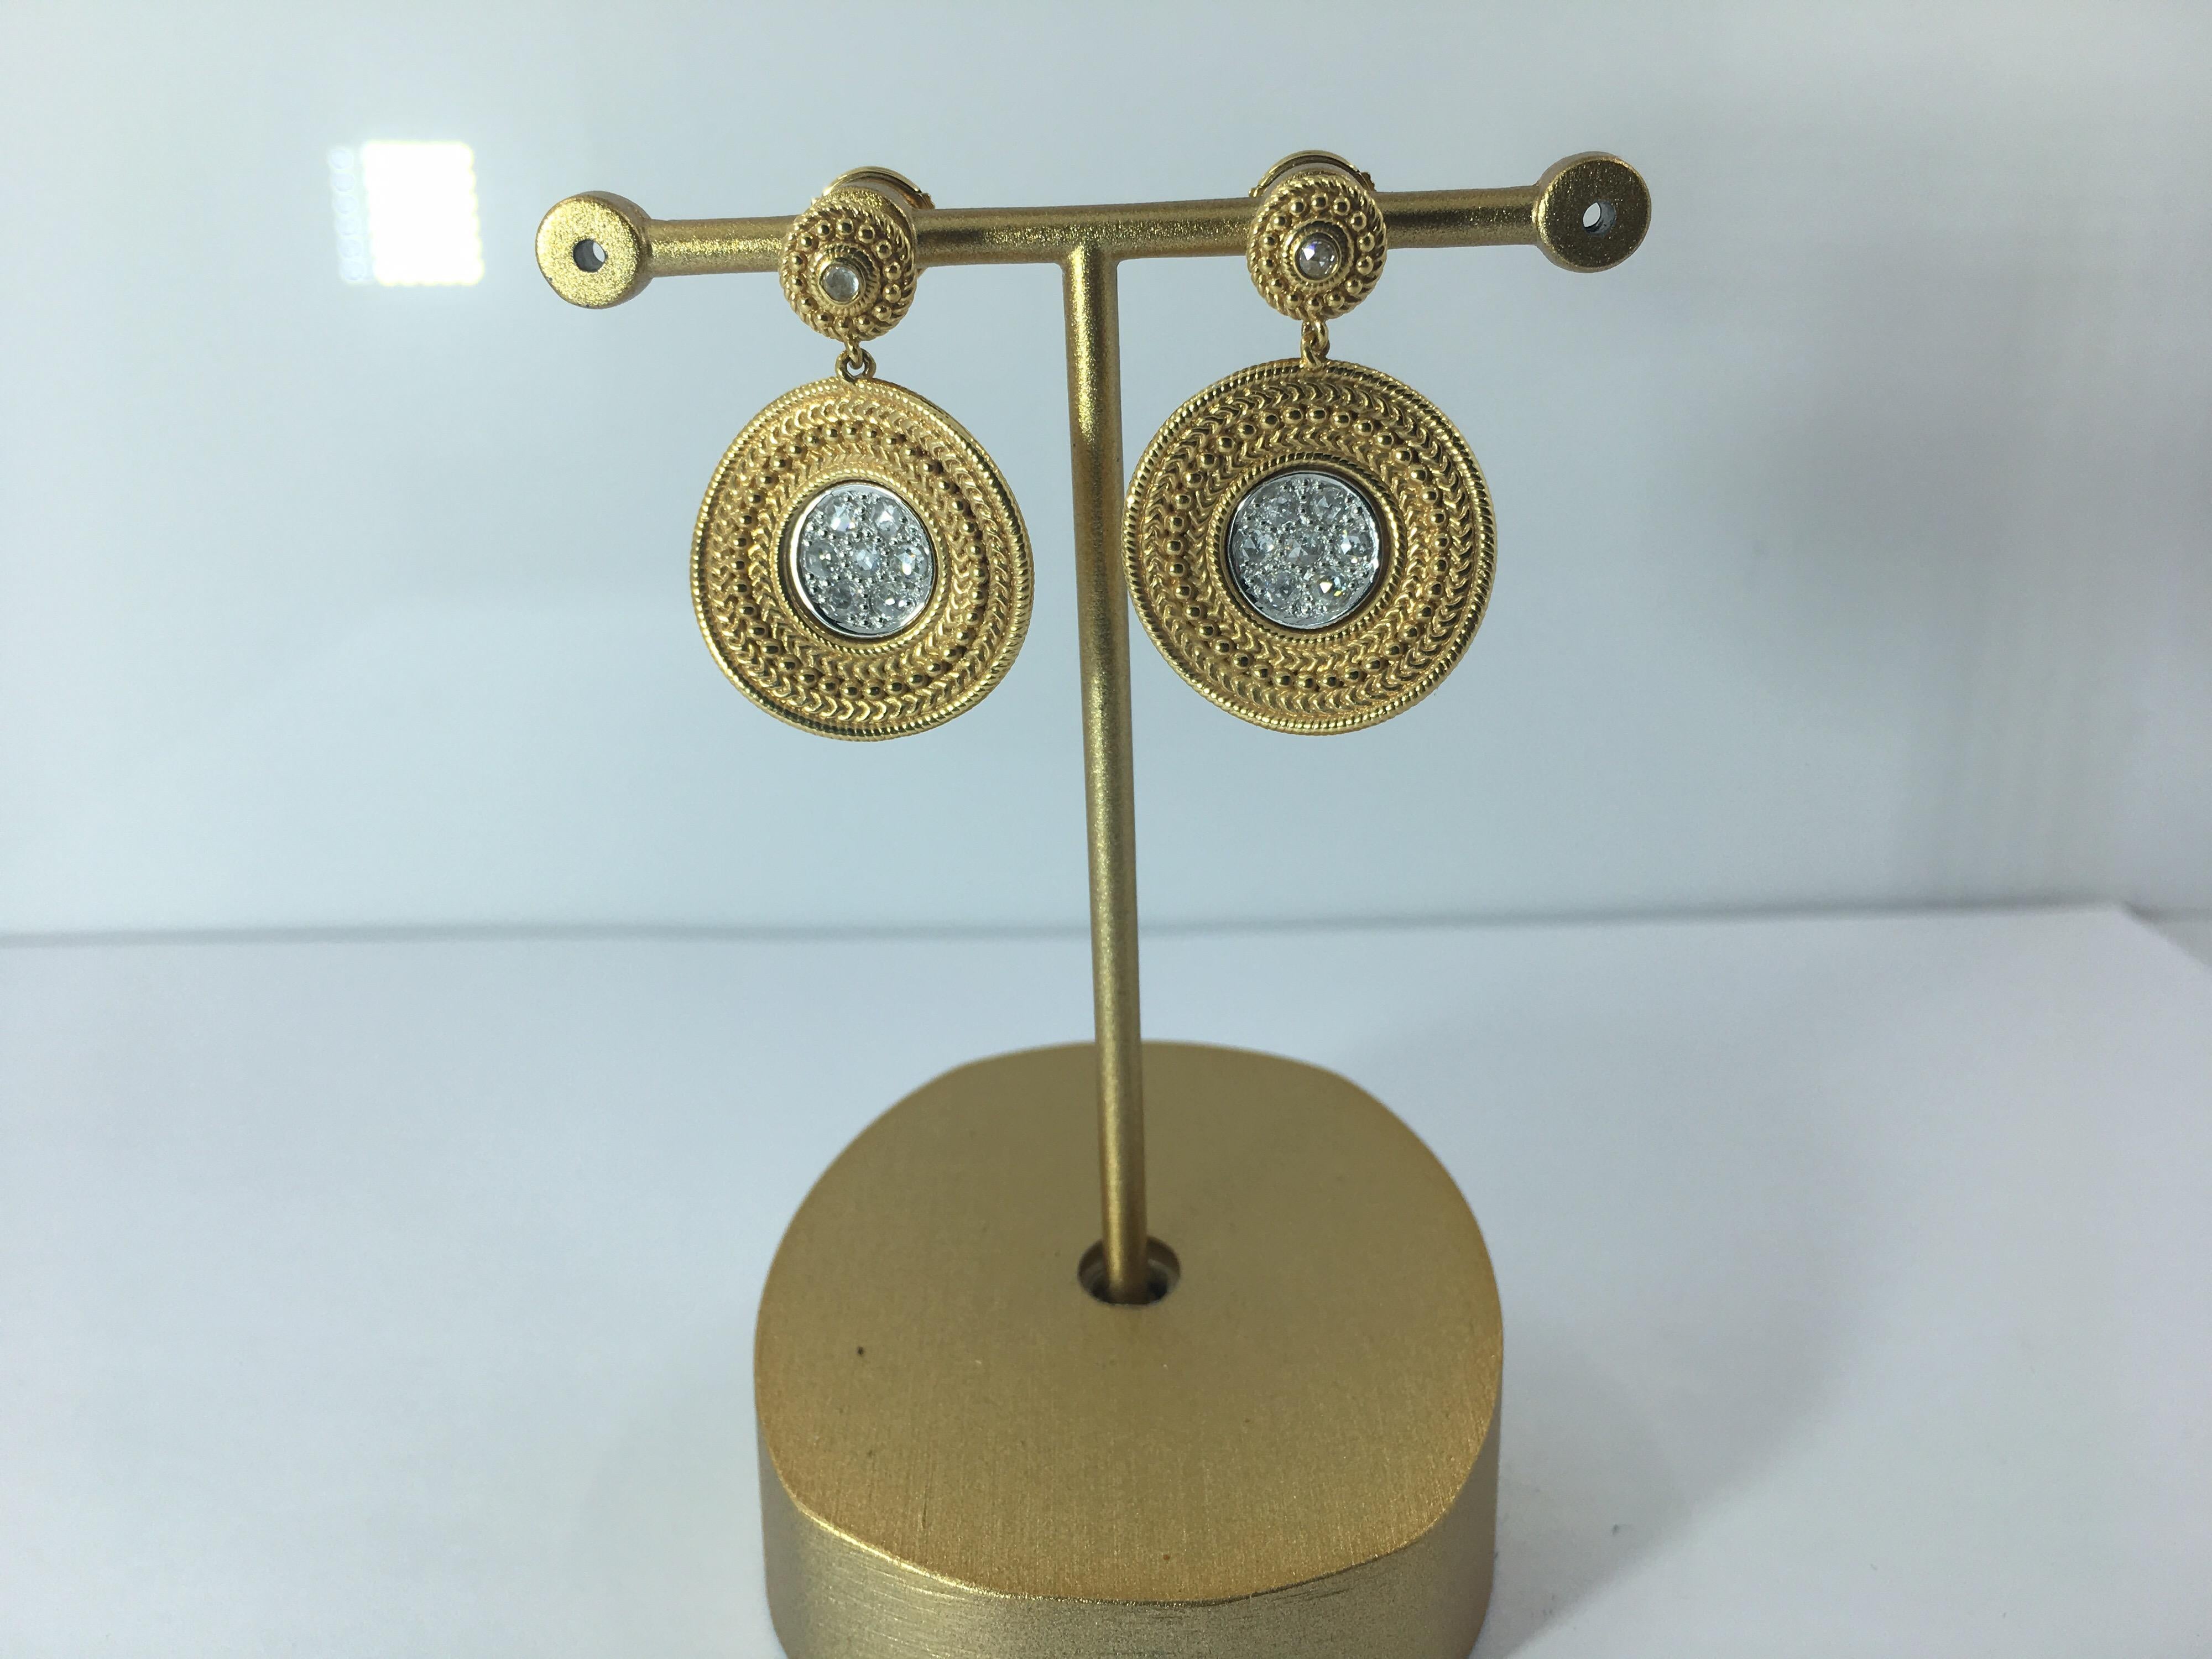 Ruedo Collection Earrings
18kt Yellow Gold Earrings (14.7gr)
With Diamond Centered Small Drop
And White Gold And Diamond Centered Disk = 0.60ct
